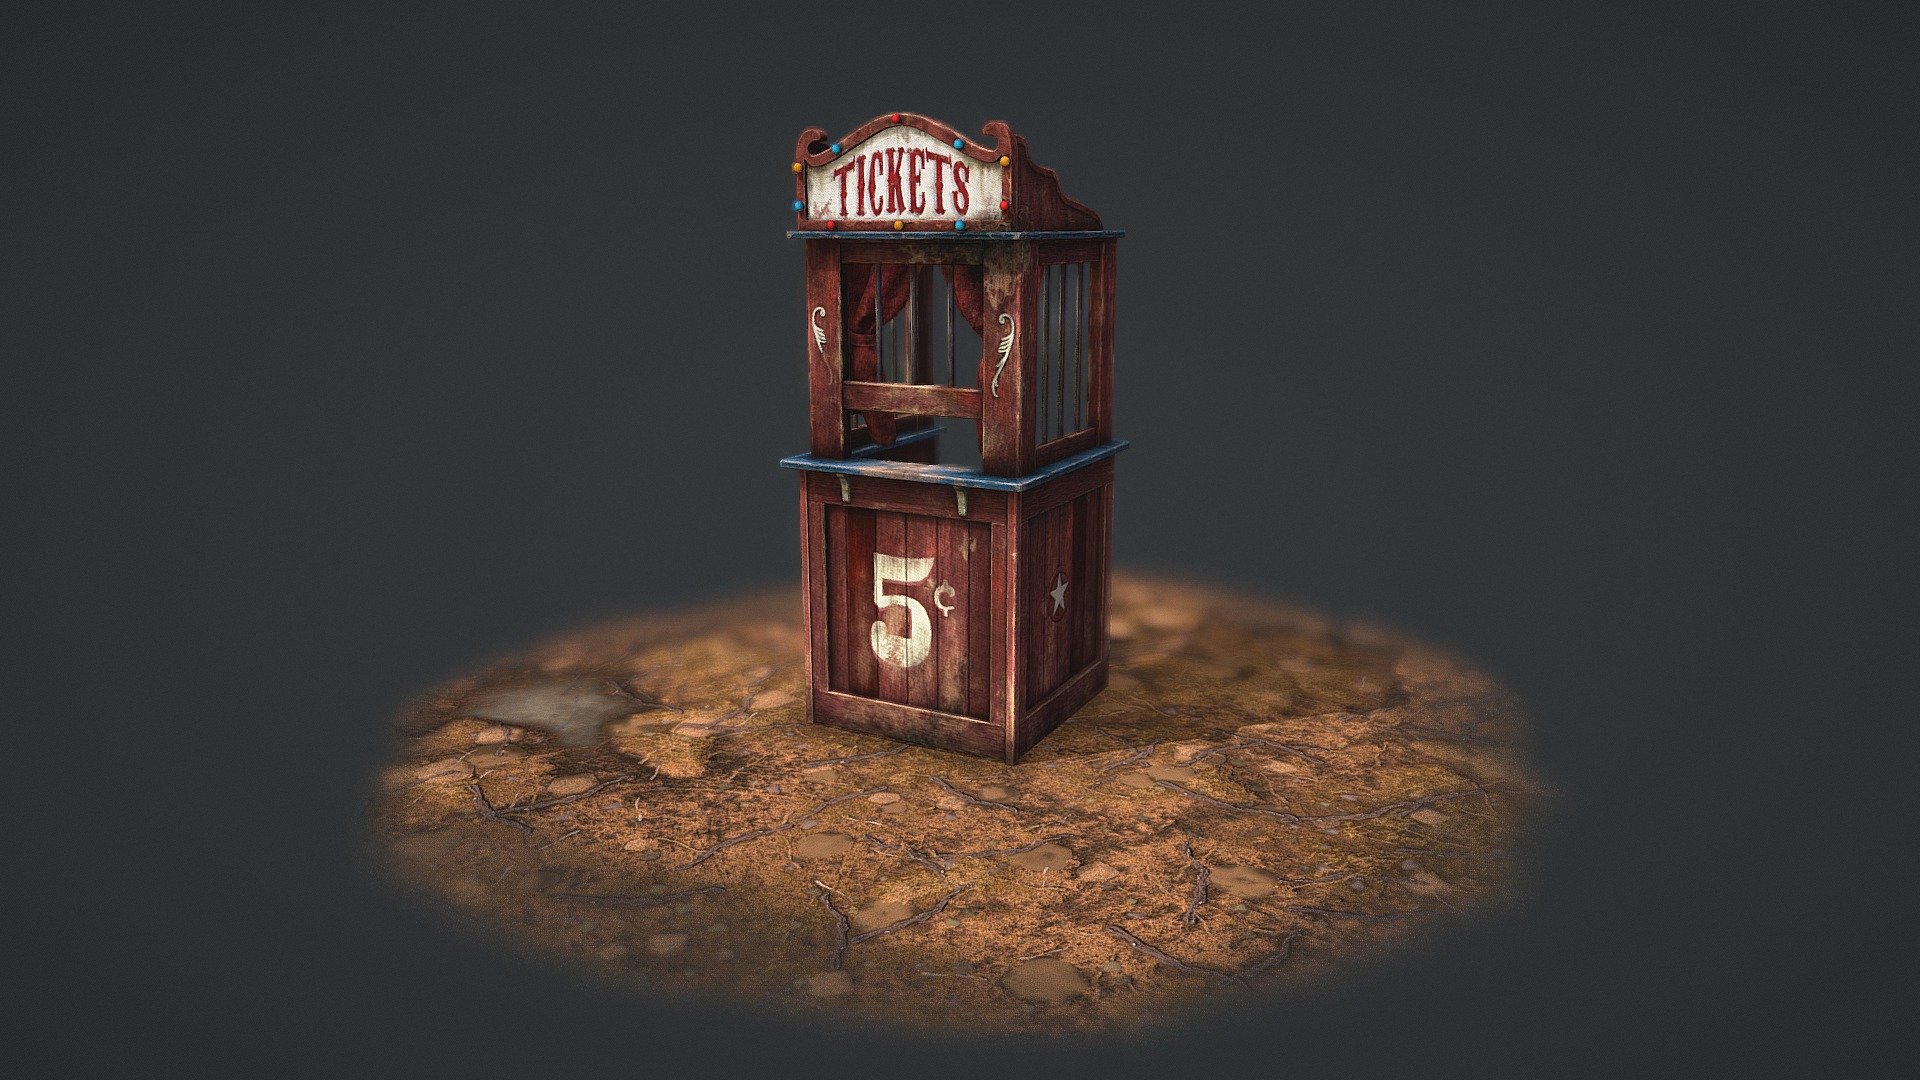 Game ready asset of a 1940's Ticket Booth for a hypothetical horror game. This asset uses 4k textures and would be suited for any horror related game or enviroment. 

This asset was part of a University task but other than that has not been used in any other projects, therefore I am posting it as my first asset for sale to help support myself during my final year in university! The tilable ground textures are also included.

More renders and shots of the booth can be seen on my Artstation post here: https://www.artstation.com/artwork/oAPaAJ - 1940's Ticket Booth - Buy Royalty Free 3D model by Grizzlewood 3d model